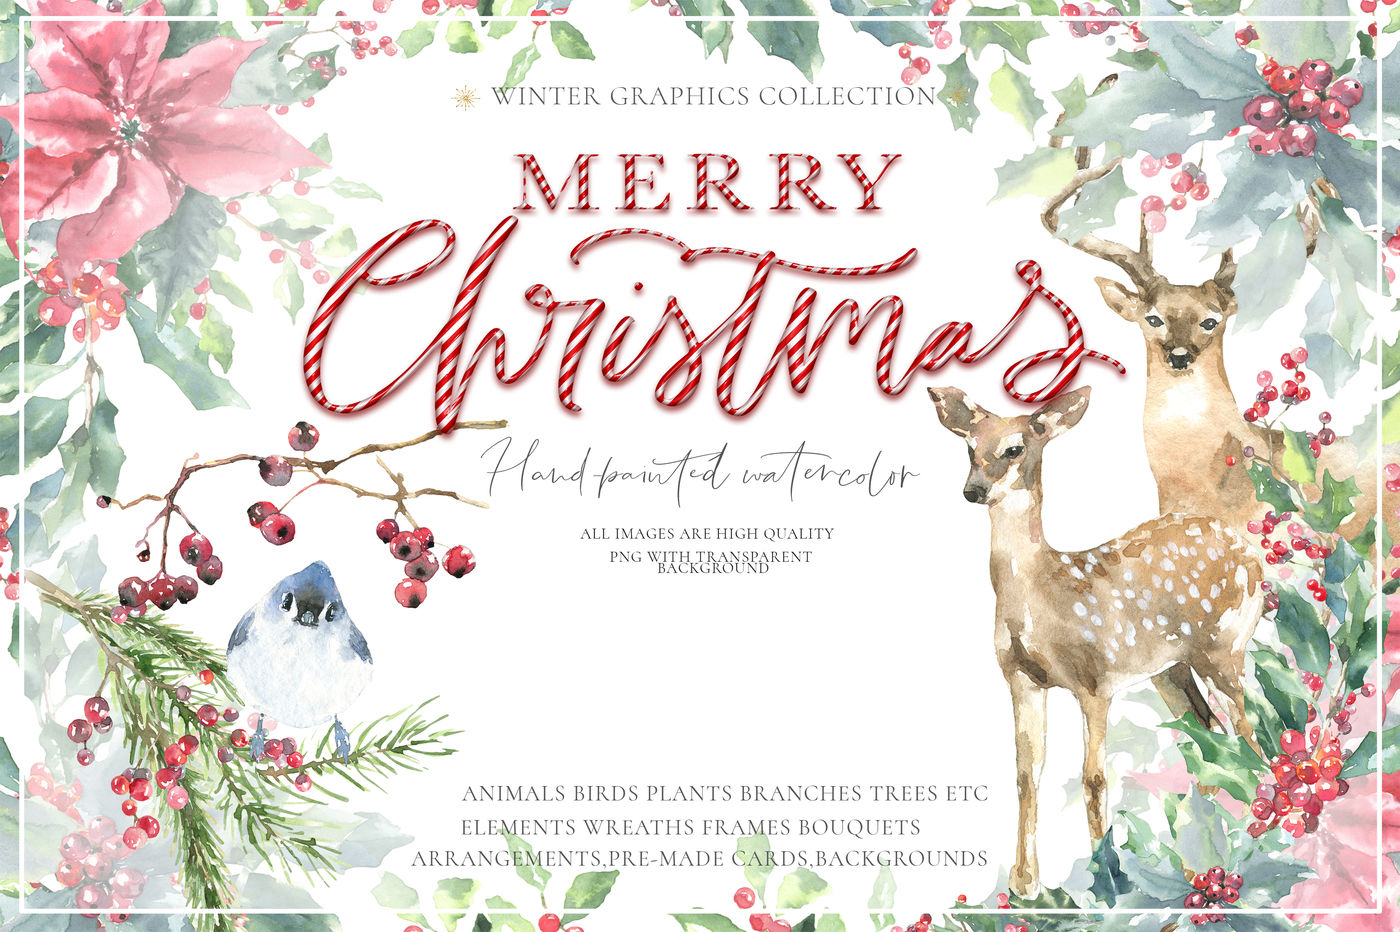 Merry Christmas Watercolor Graphics clipart By Catherine.